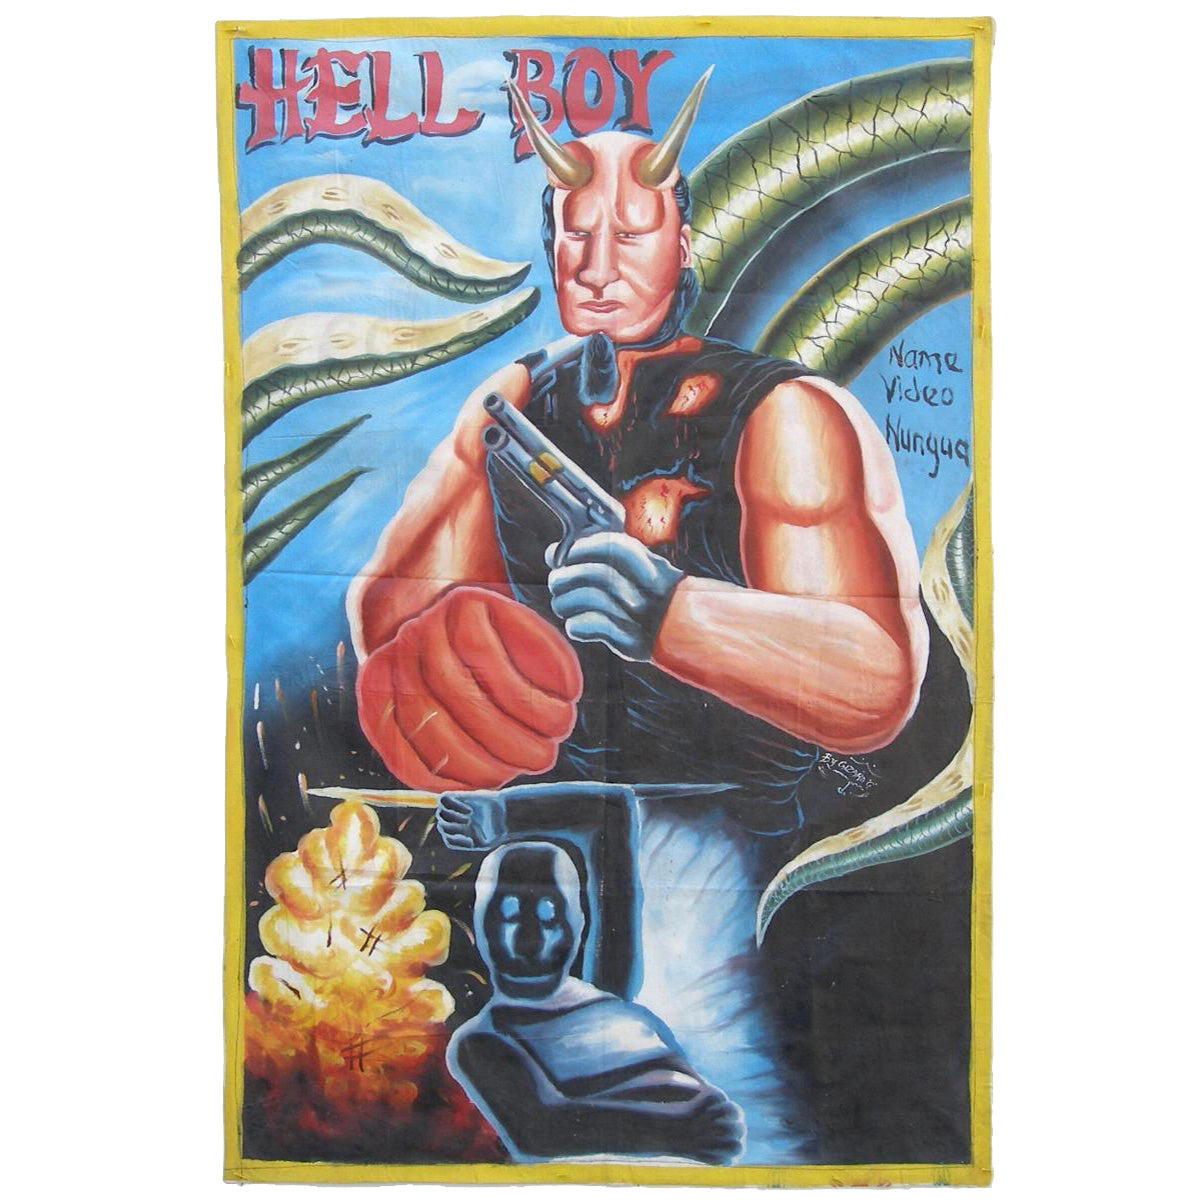 HELL BOY MOVIE POSTER HAND PAINTED IN GHANA WEST AFRICA FOR THE LOCAL CINEMA